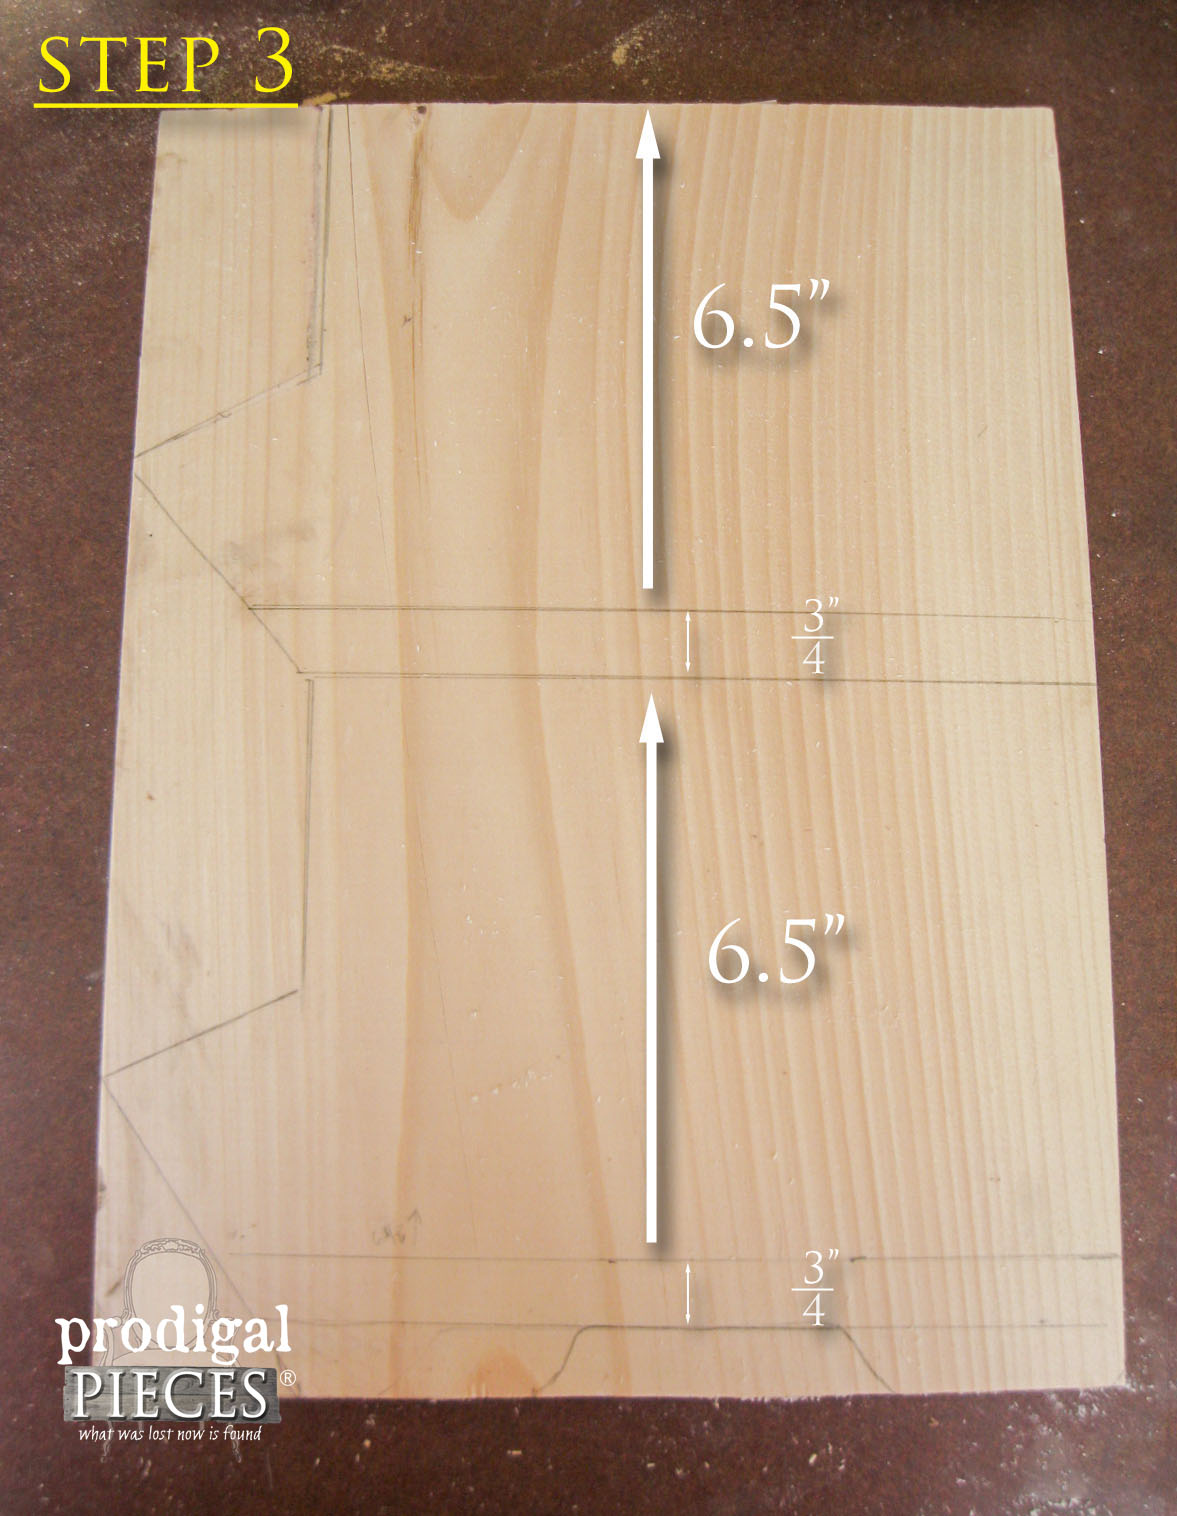 Step 3 of Building Wooden Bin by Prodigal Pieces | www.prodigalpieces.com